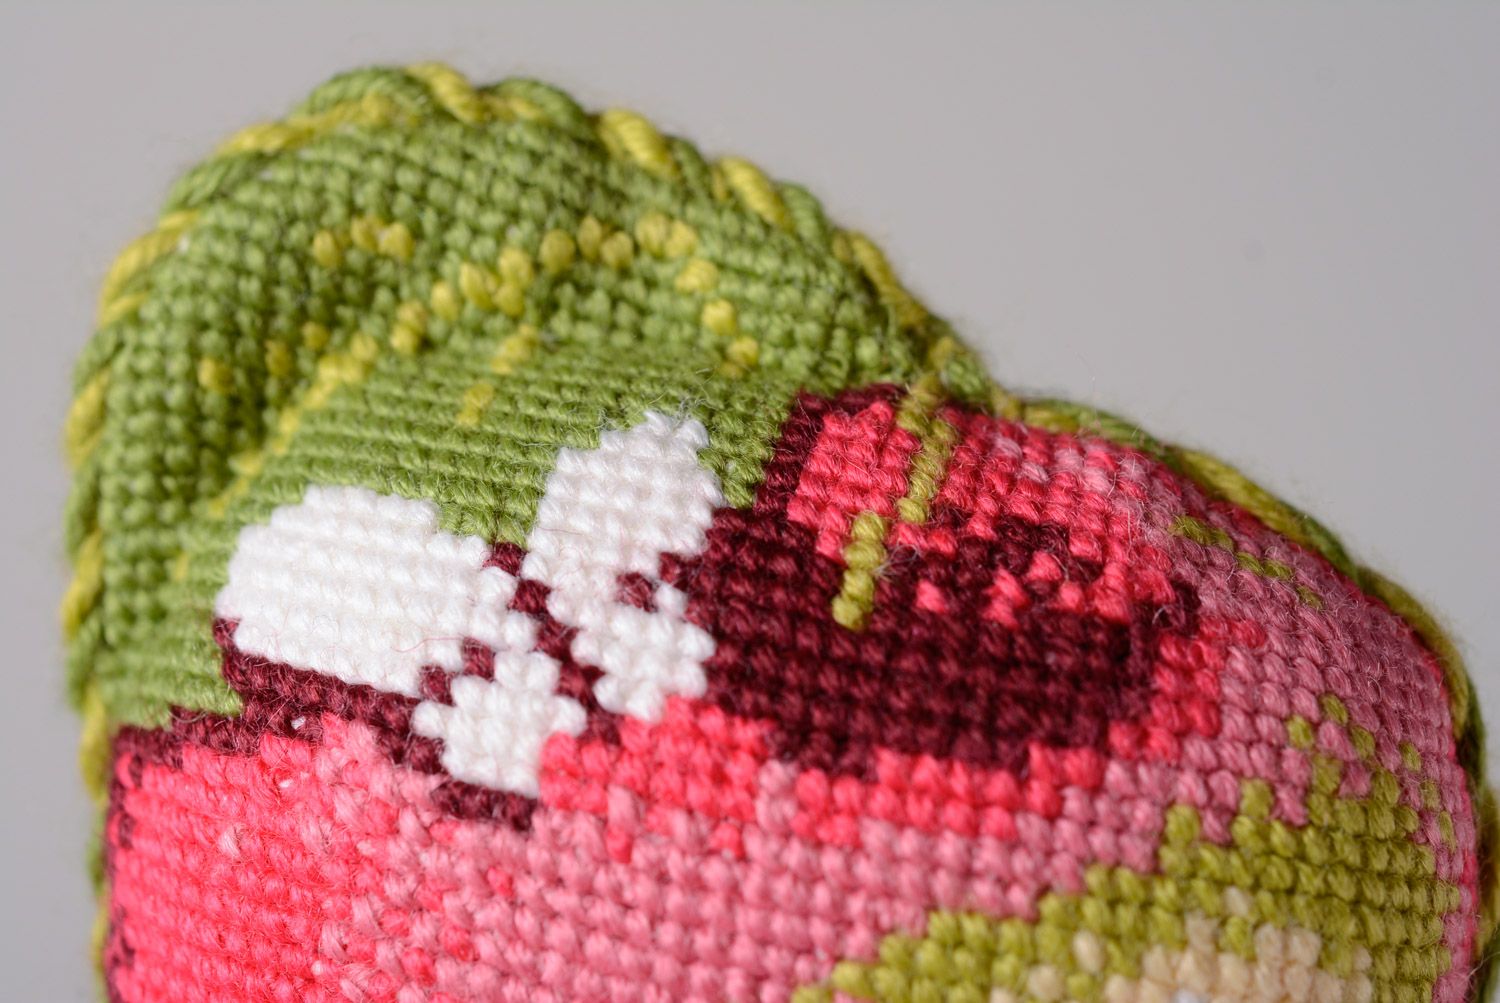 Handmade soft pincushion in the shape of apple with cross stitch embroidery photo 4